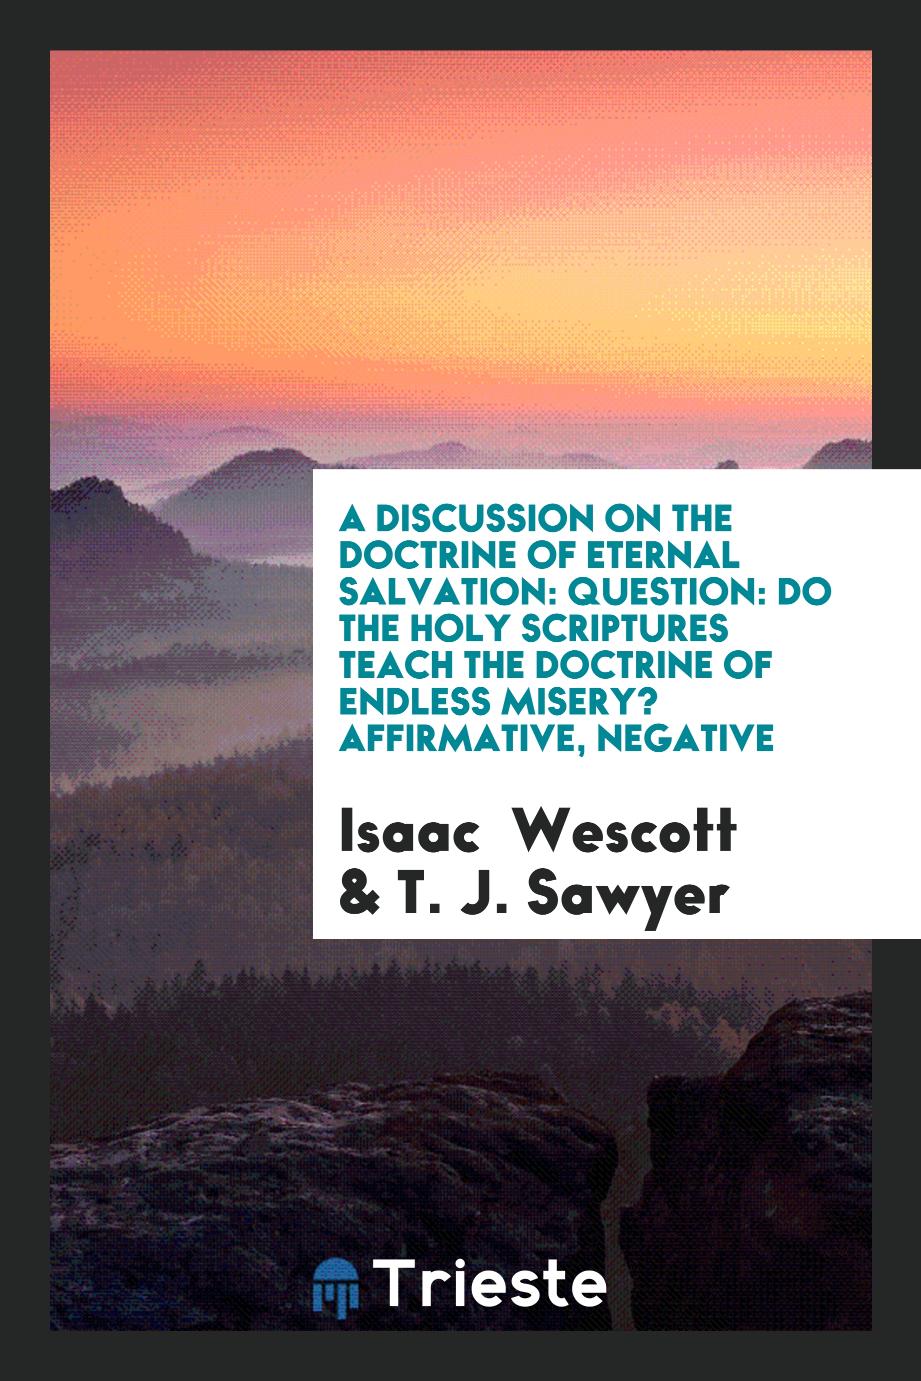 A Discussion on the Doctrine of Eternal Salvation: Question: Do the Holy Scriptures Teach the Doctrine of Endless Misery? Affirmative, Negative